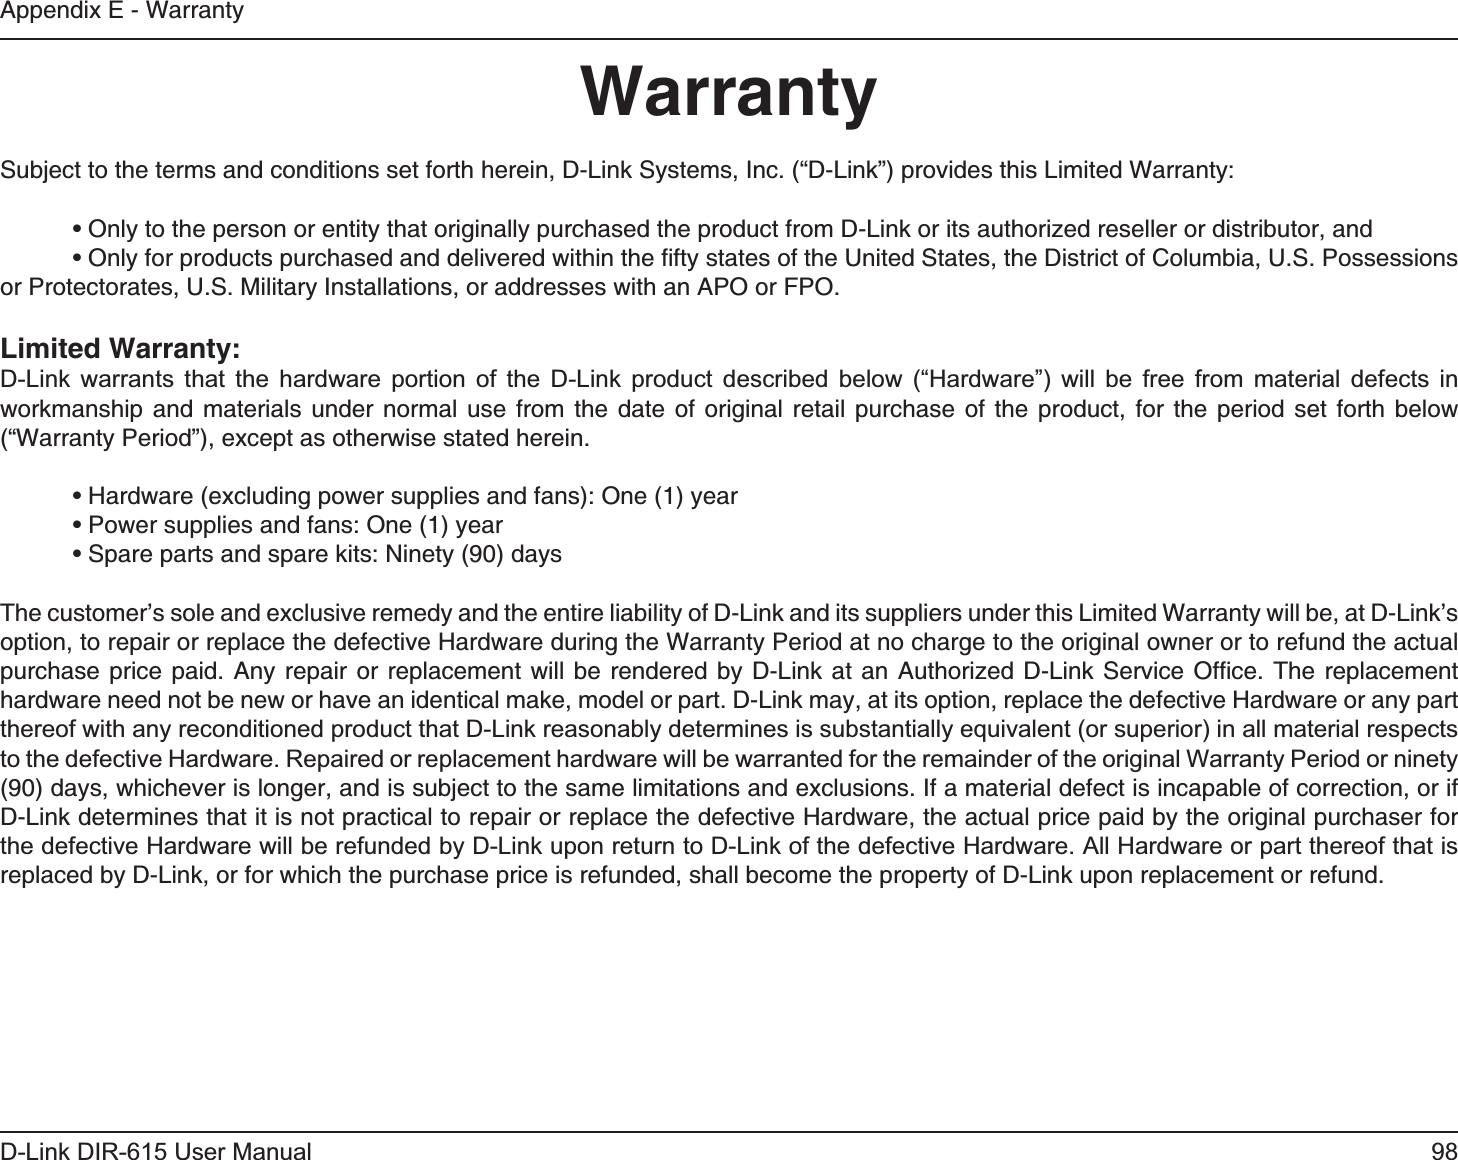 98D-Link DIR-615 User ManualAppendix E - WarrantyWarrantySubject to the terms and conditions set forth herein, D-Link Systems, Inc. (“D-Link”) provides this Limited Warranty:  • Only to the person or entity that originally purchased the product from D-Link or its authorized reseller or distributor, and  • Only for products purchased and delivered within the ﬁfty states of the United States, the District of Columbia, U.S. Possessions   or Protectorates, U.S. Military Installations, or addresses with an APO or FPO.Limited Warranty:D-Link warrants that the hardware portion of the D-Link product described below (“Hardware”) will be free from material defects in workmanship and materials under normal use from the date of original retail purchase of the product, for the period set forth below (“Warranty Period”), except as otherwise stated herein.  • Hardware (excluding power supplies and fans): One (1) year  • Power supplies and fans: One (1) year  • Spare parts and spare kits: Ninety (90) daysThe customer’s sole and exclusive remedy and the entire liability of D-Link and its suppliers under this Limited Warranty will be, at D-Link’s option, to repair or replace the defective Hardware during the Warranty Period at no charge to the original owner or to refund the actual purchase price paid. Any repair or replacement will be rendered by D-Link at an Authorized D-Link Service Ofﬁce. The replacement hardware need not be new or have an identical make, model or part. D-Link may, at its option, replace the defective Hardware or any part thereof with any reconditioned product that D-Link reasonably determines is substantially equivalent (or superior) in all material respects to the defective Hardware. Repaired or replacement hardware will be warranted for the remainder of the original Warranty Period or ninety (90) days, whichever is longer, and is subject to the same limitations and exclusions. If a material defect is incapable of correction, or if D-Link determines that it is not practical to repair or replace the defective Hardware, the actual price paid by the original purchaser for the defective Hardware will be refunded by D-Link upon return to D-Link of the defective Hardware. All Hardware or part thereof that is replaced by D-Link, or for which the purchase price is refunded, shall become the property of D-Link upon replacement or refund.